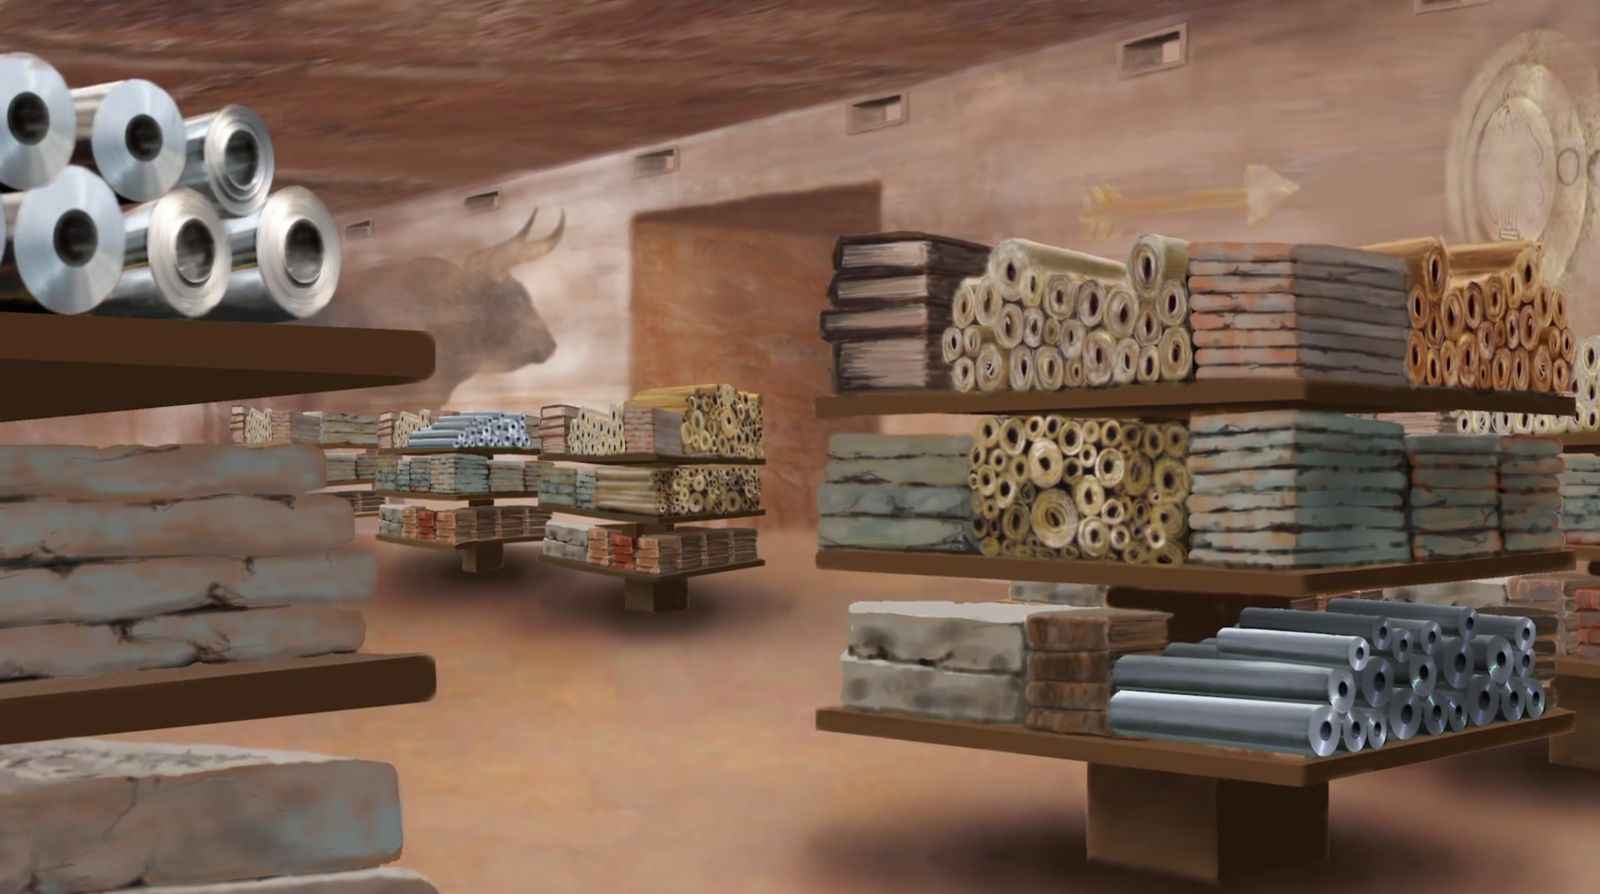 16_Room_with_scrolls_books_records.jpg